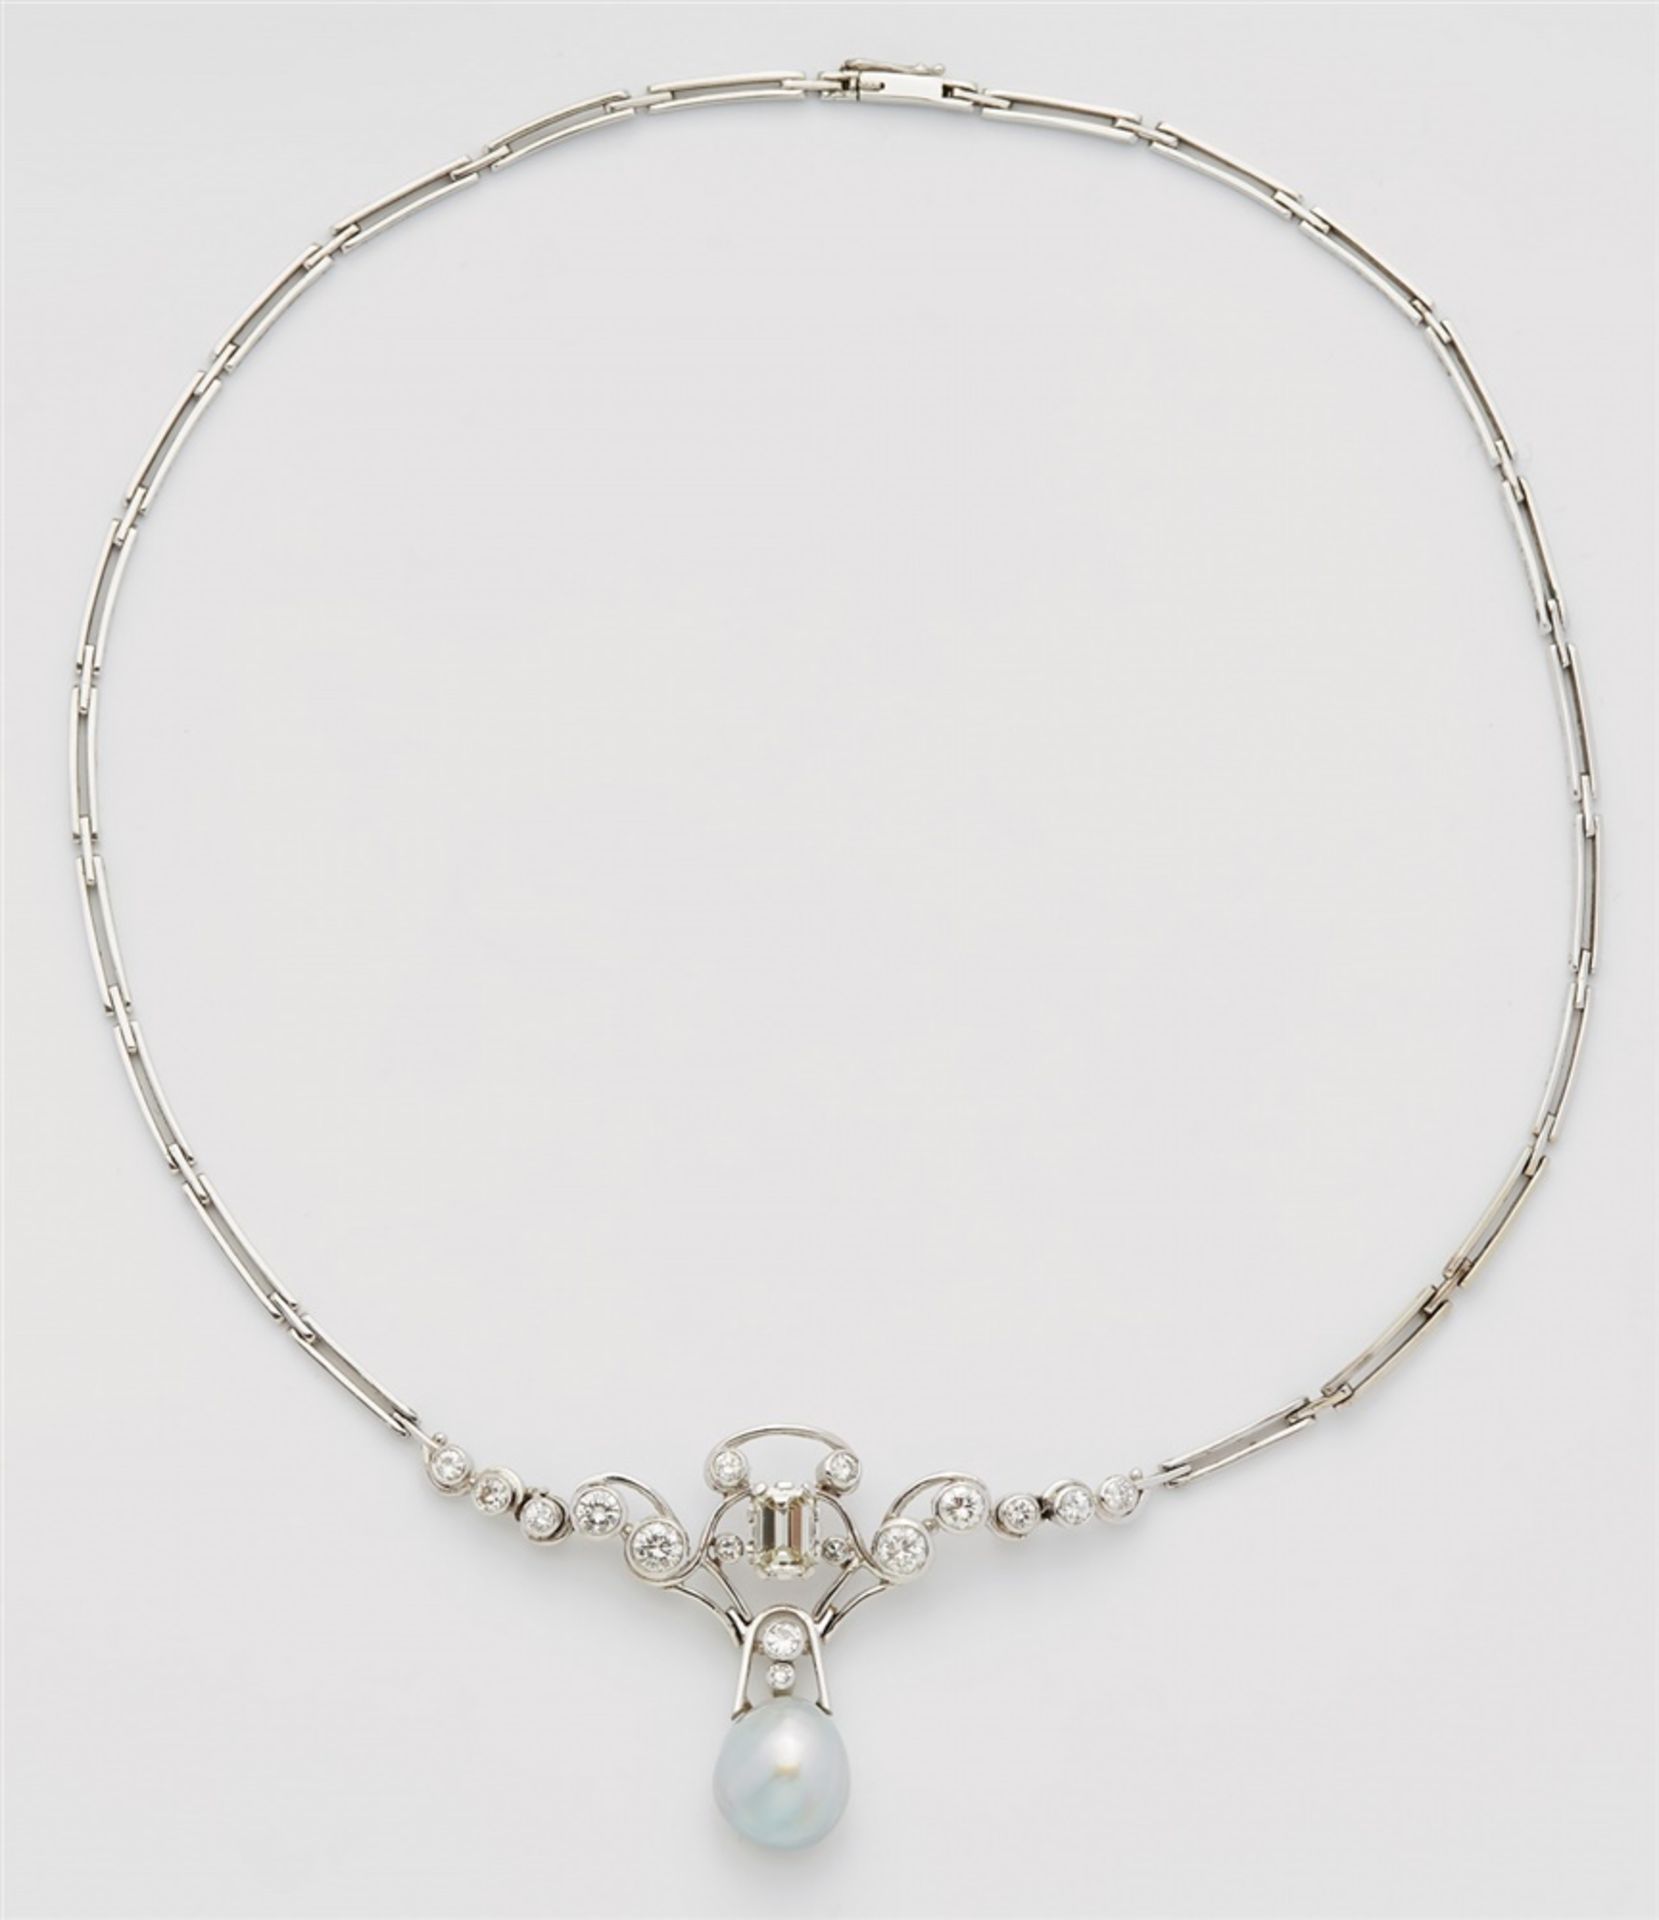 A 14k white gold diamond and pearl necklaceThe central curved motif formed from gold wire and set